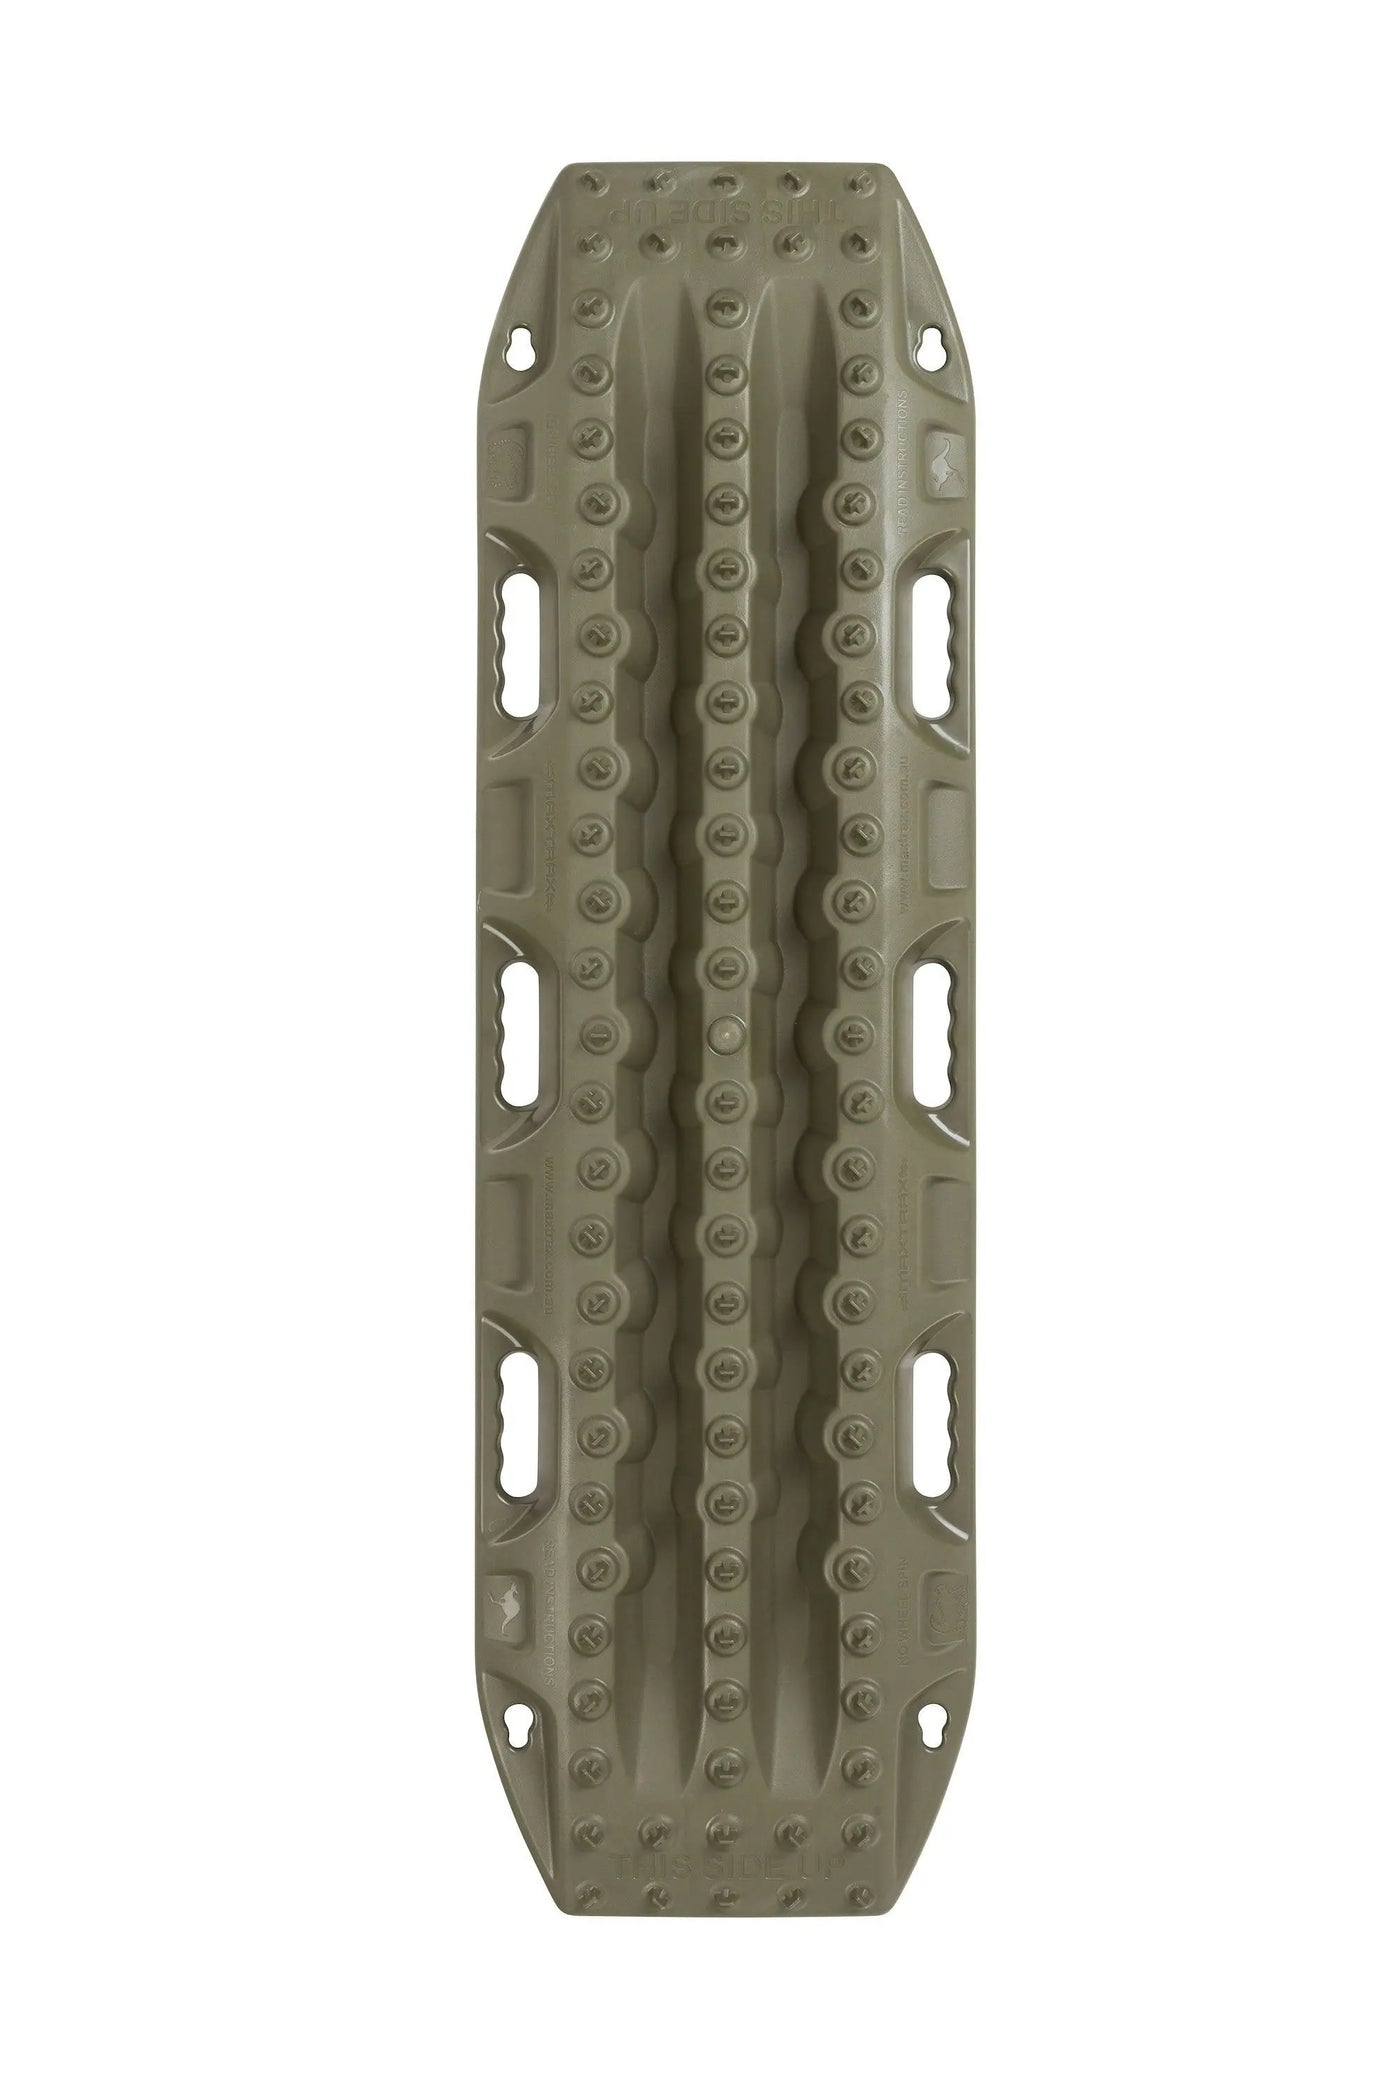 MAXTRAX MKII Olive Drab Recovery Boards - Wheel Every Weekend